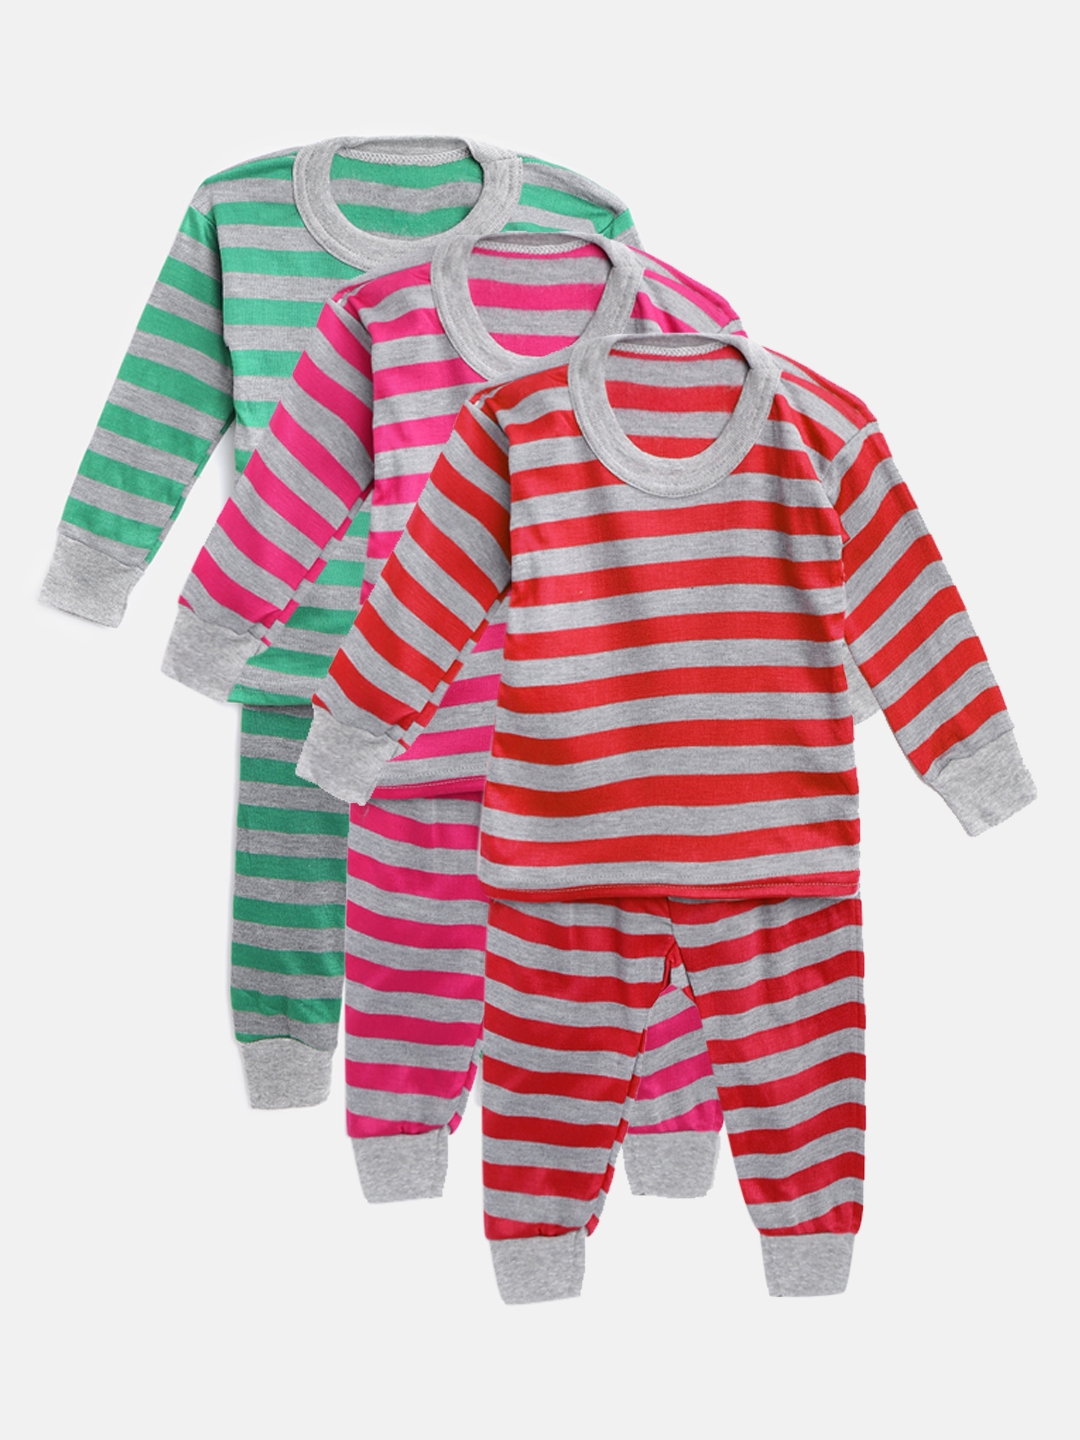 MANZON Kids Pack of 3 Striped Thermal Sets